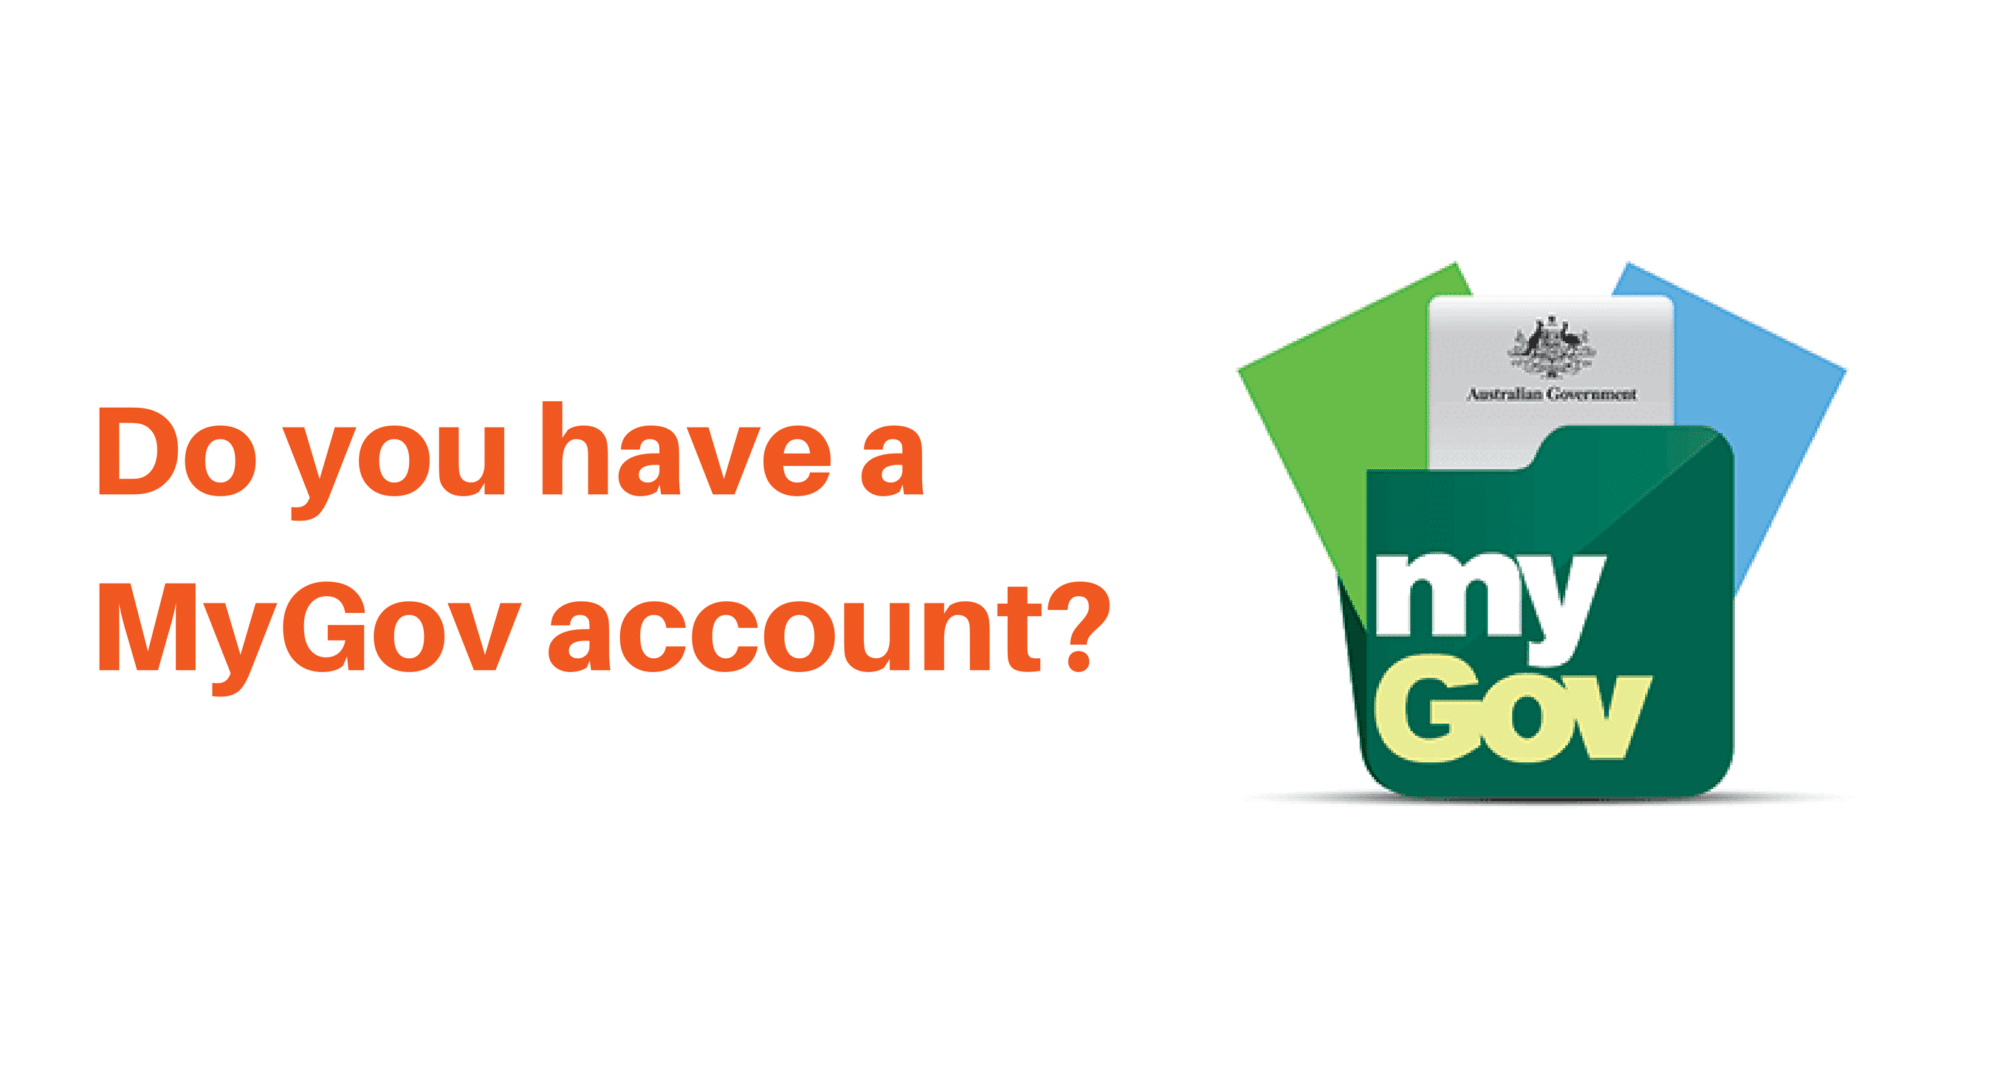 Do you have a MyGov account?